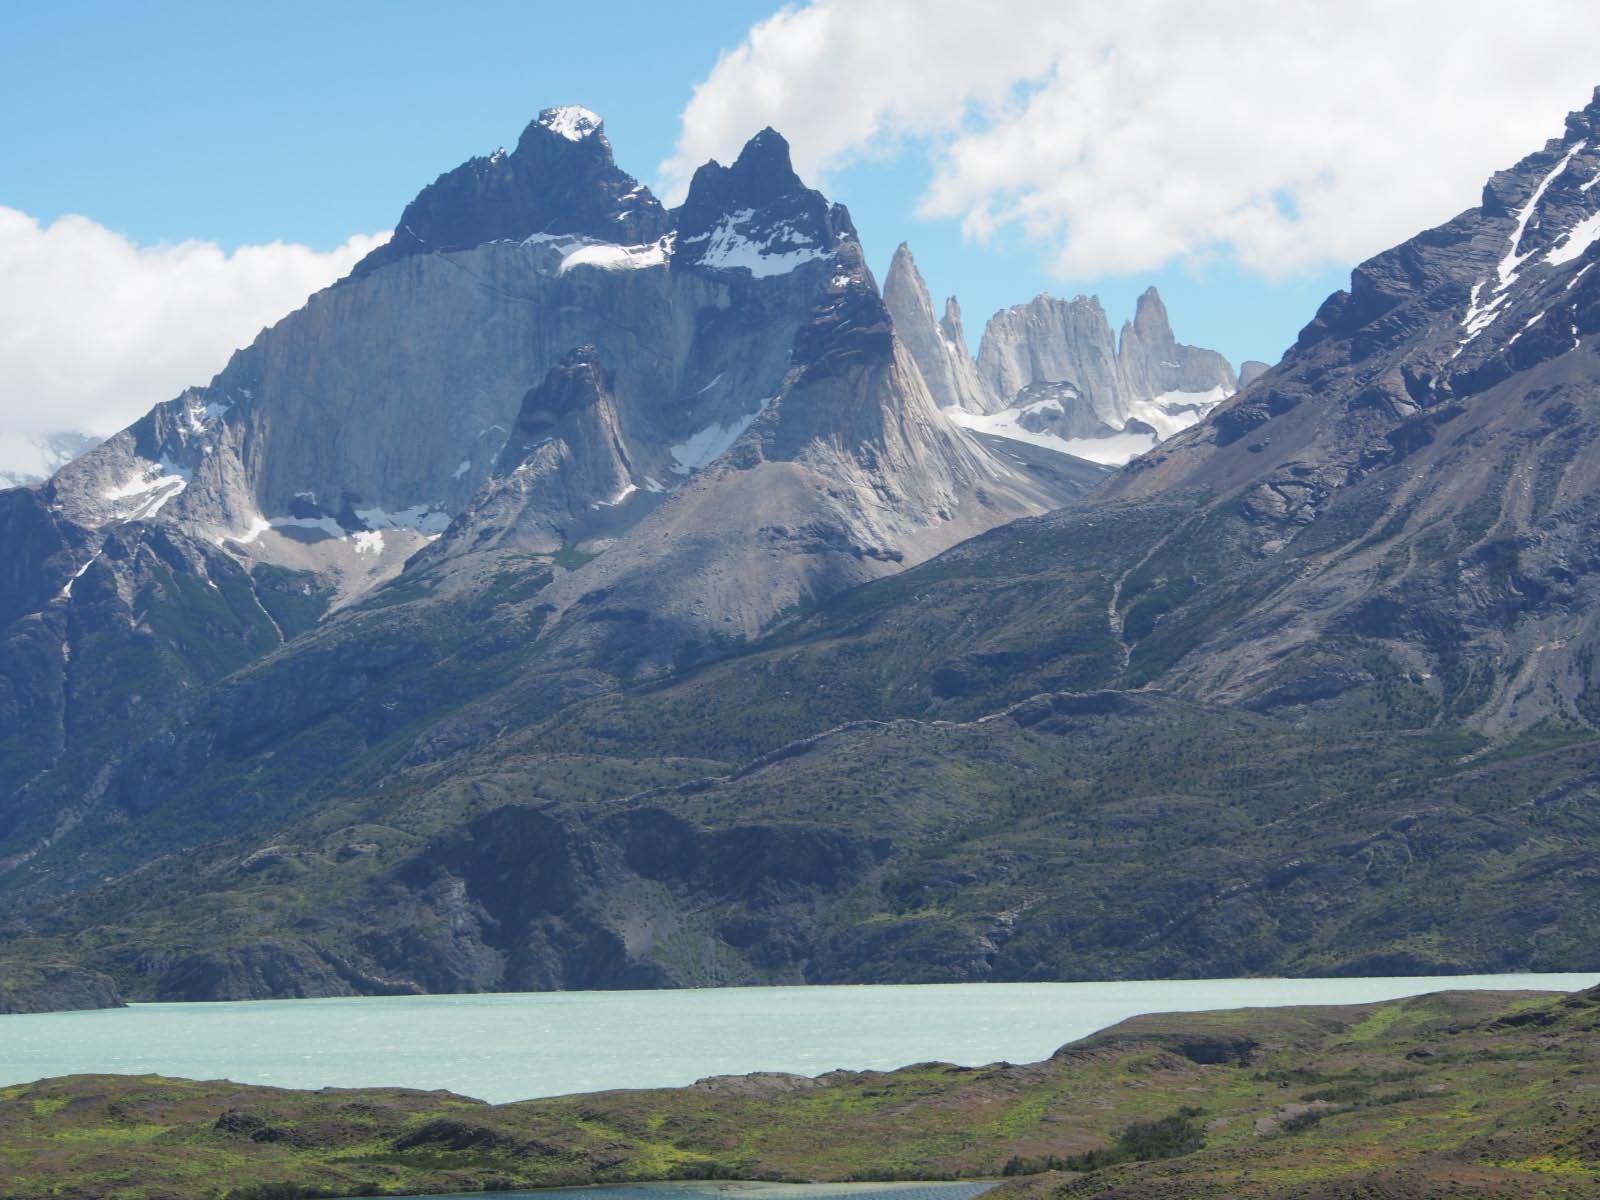 patagonie chilienne - tore del Paine